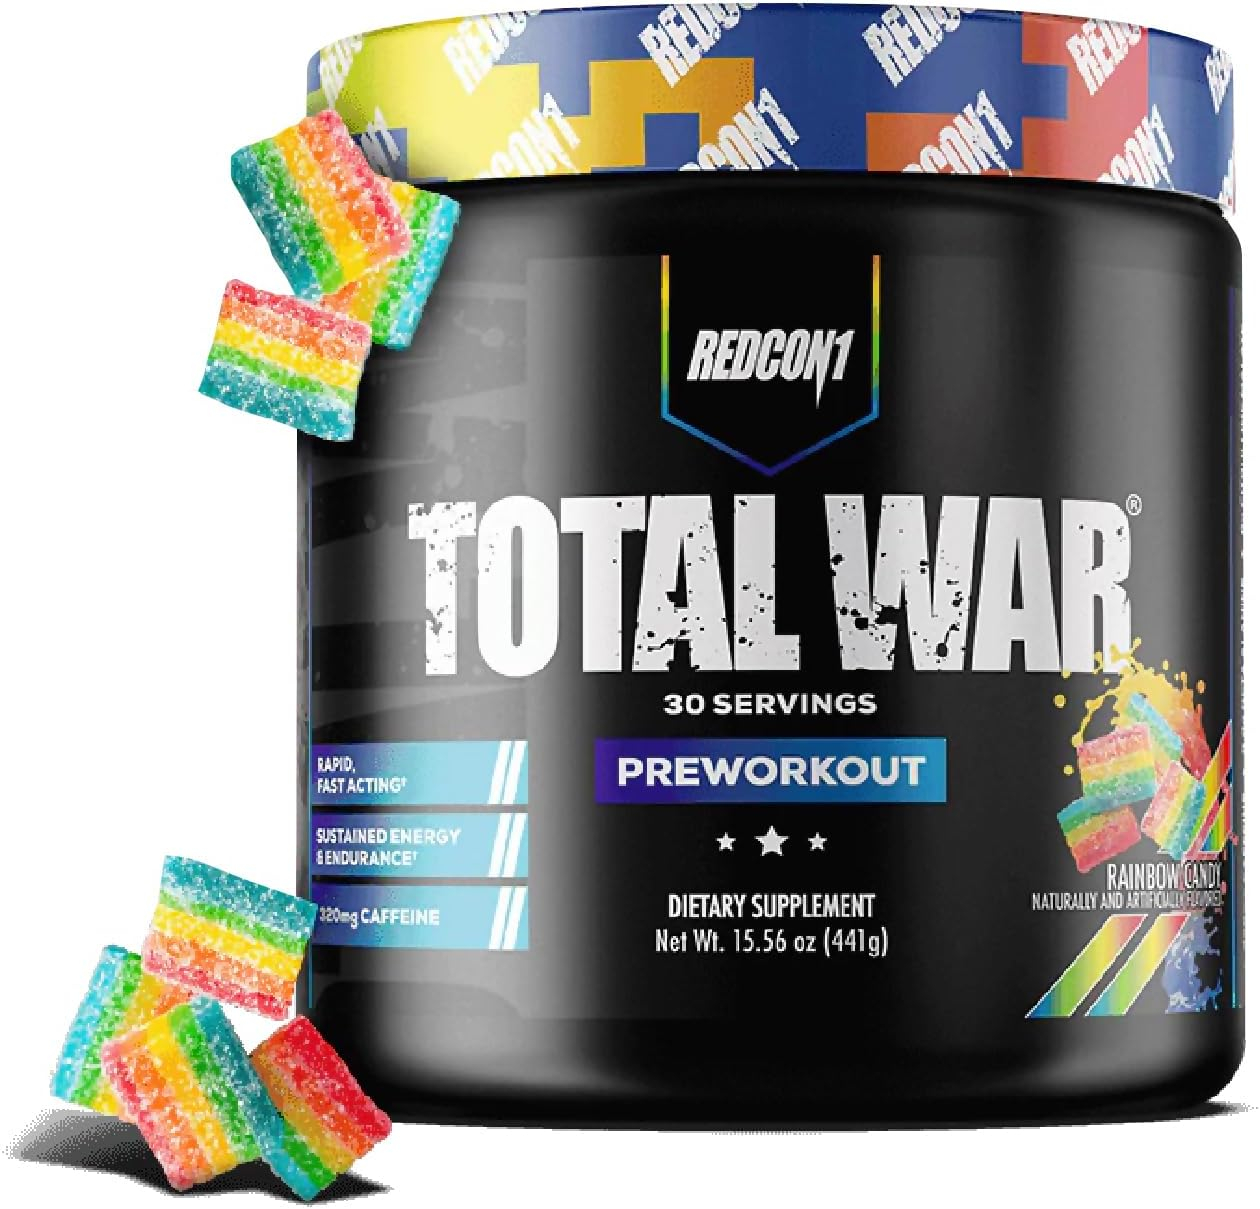 REDCON1 Total War Preworkout - Contains 320mg of Caffeine from Green Tea, Juniper  Beta Alanine - Pre Work Out with Amino Acids to Increase Pump, Energy + Endurance (Rainbow Candy, 30 Servings)